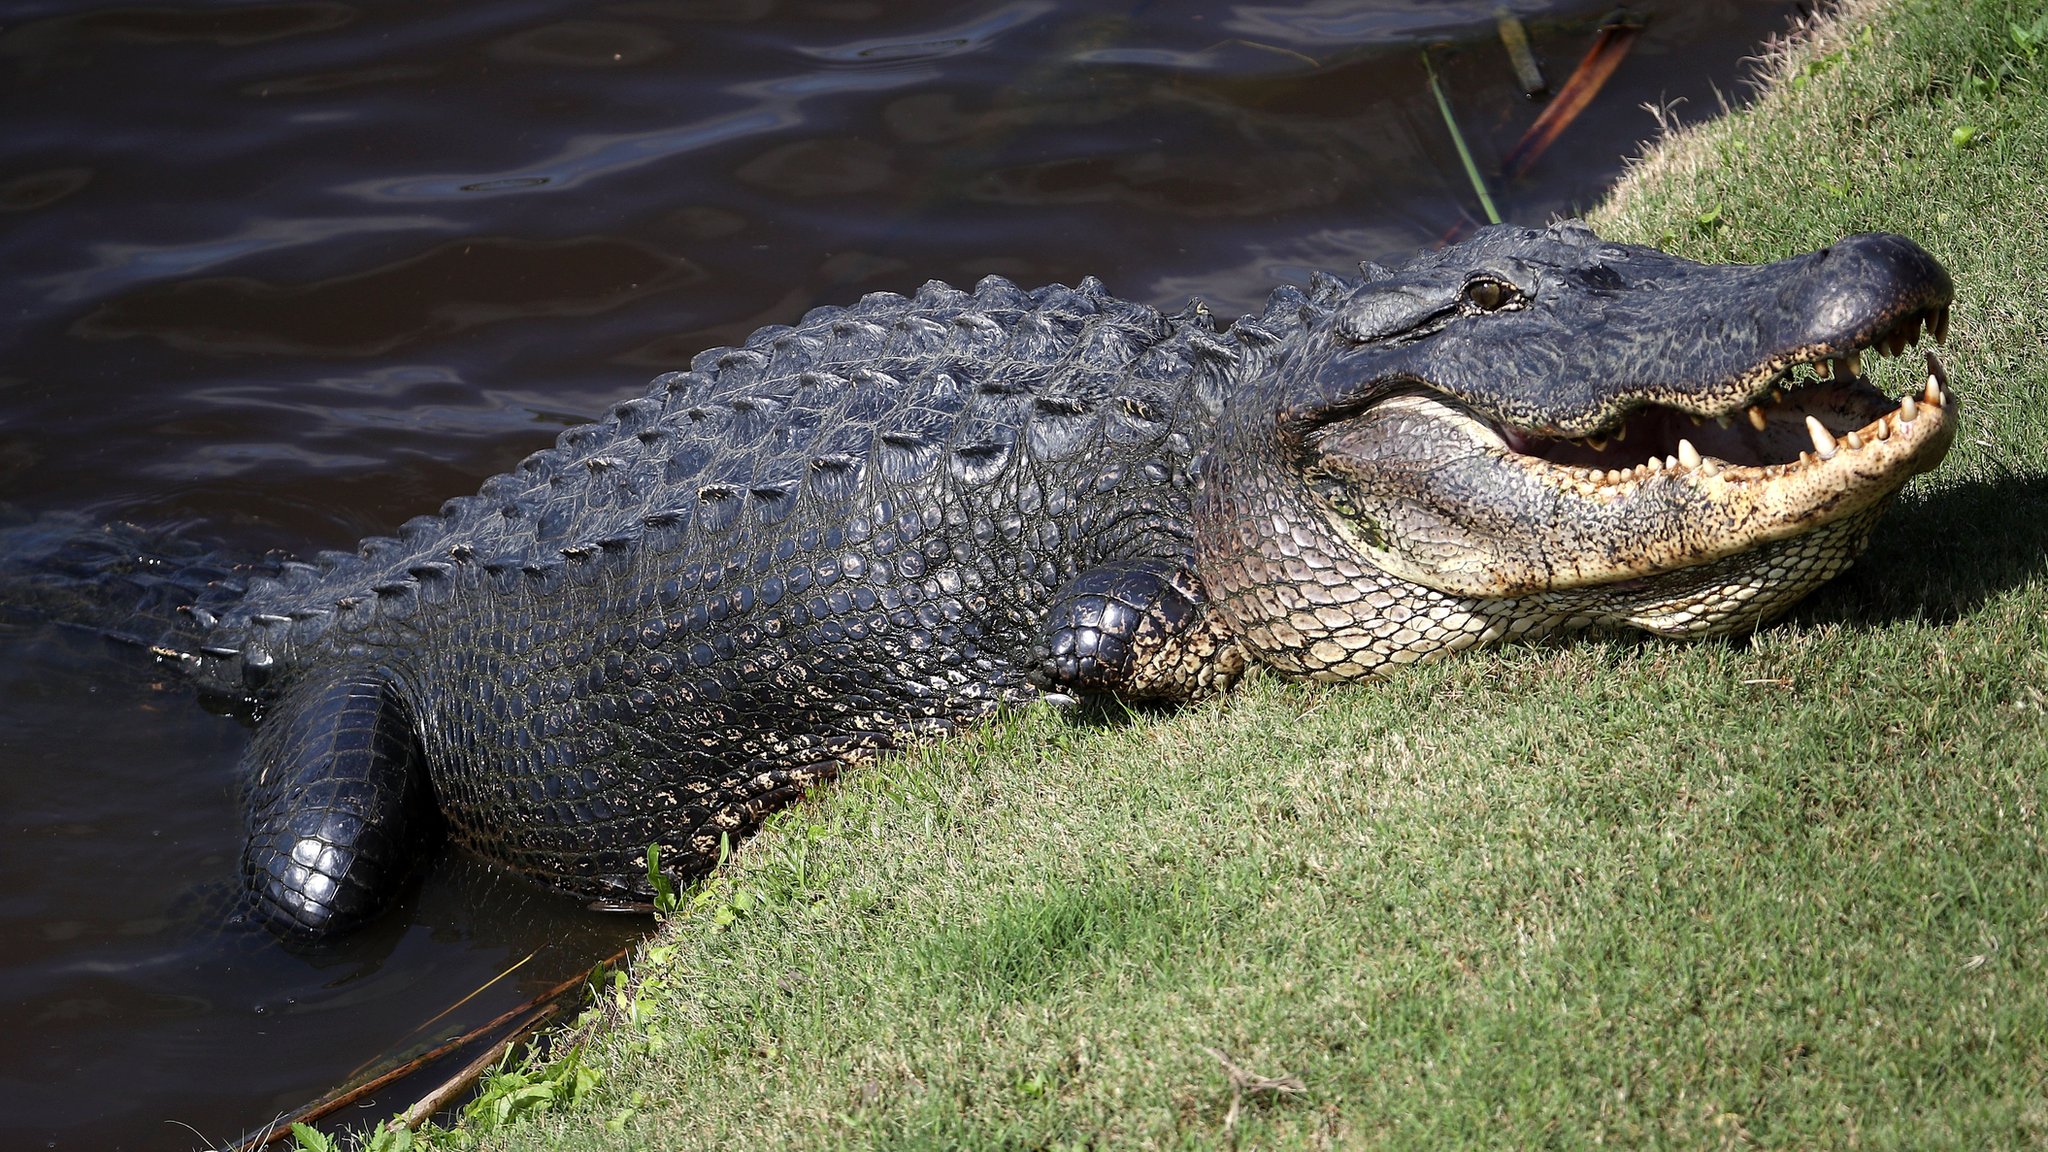 An alligator resting on ground with its more than half body outside water